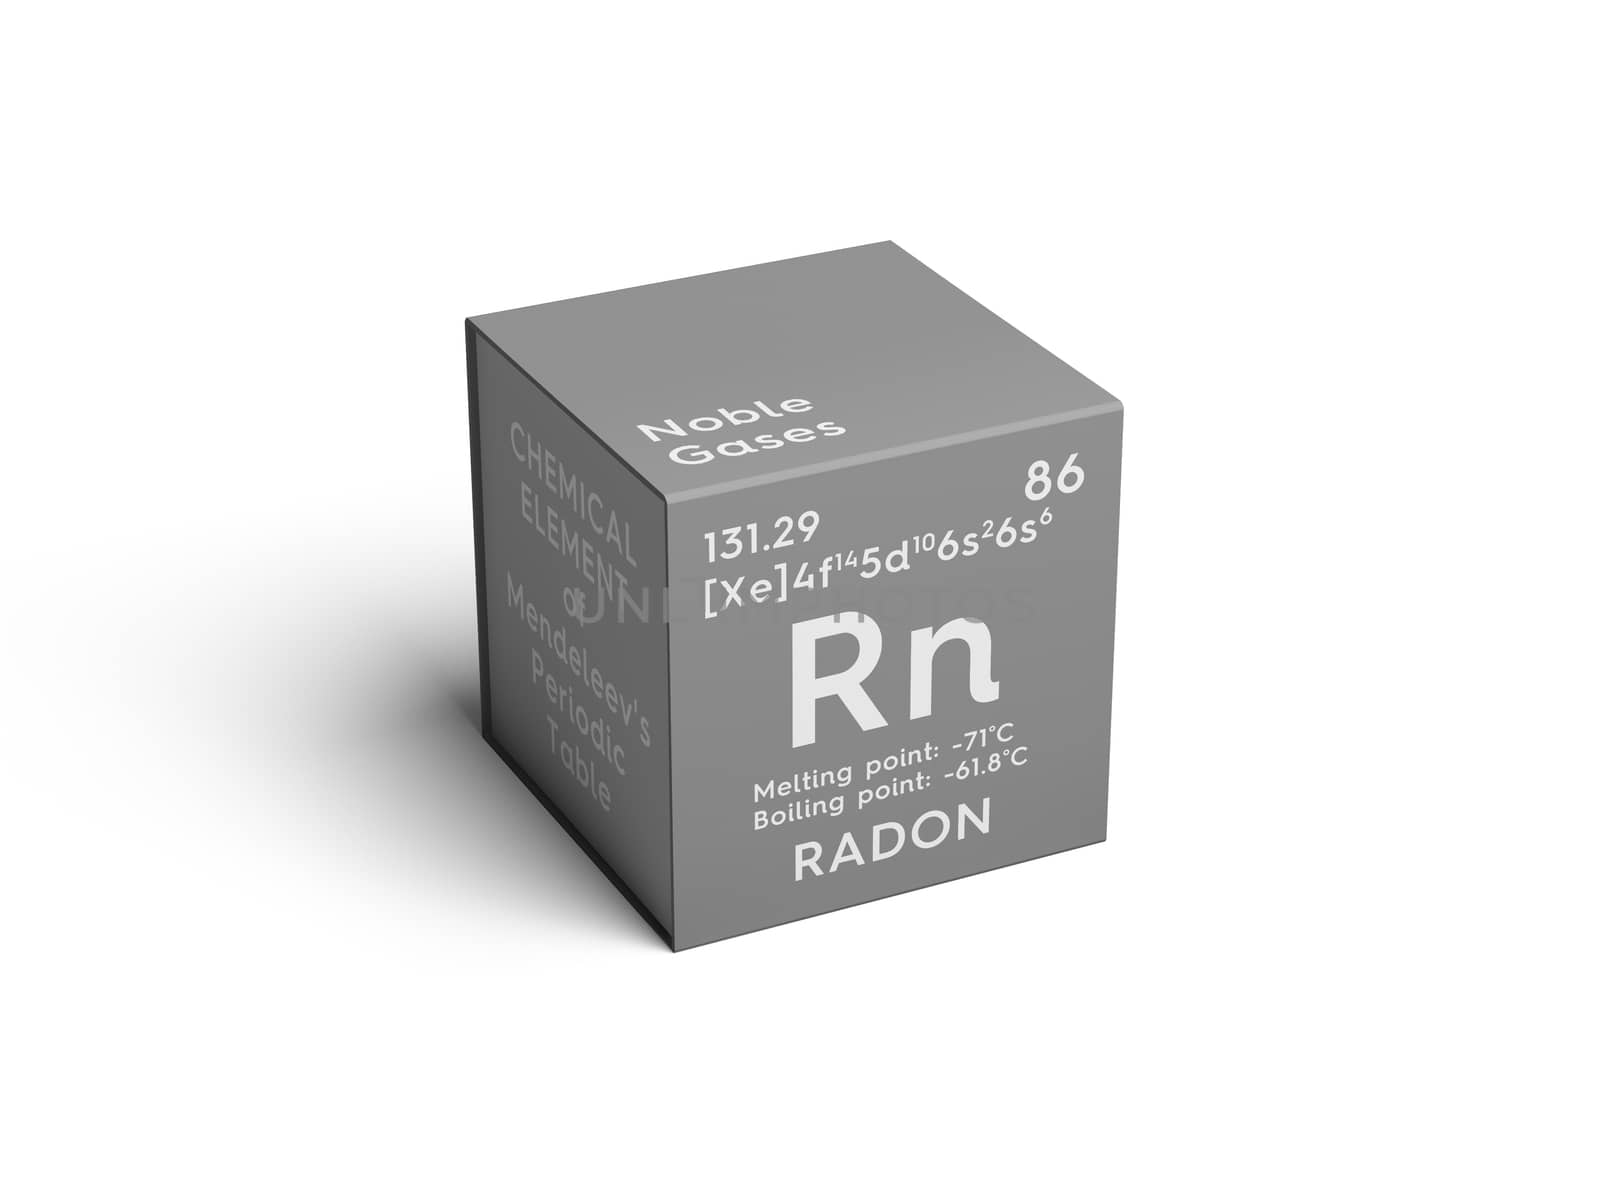 Radon. Noble gases. Chemical Element of Mendeleev's Periodic Table. Radon in square cube creative concept. 3D illustration.